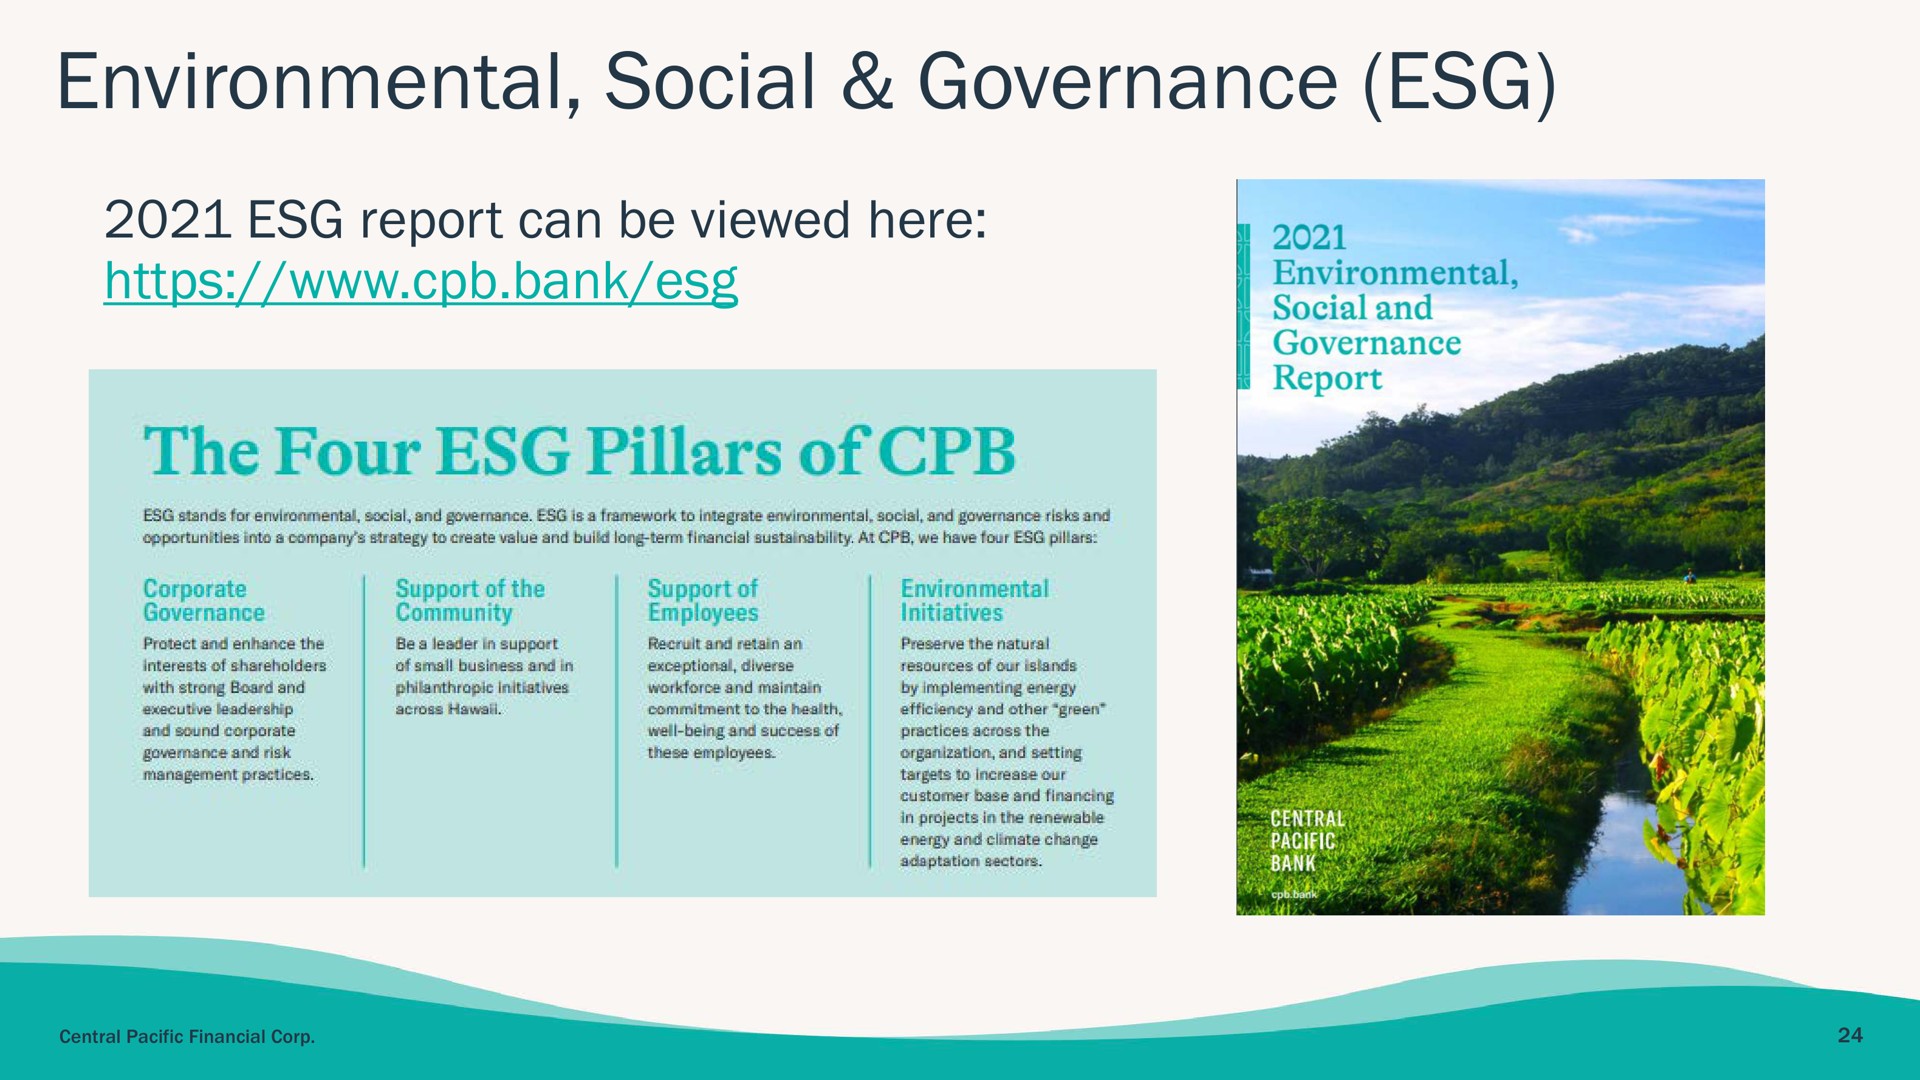 environmental social governance report can be viewed here the four pillars of | Central Pacific Financial